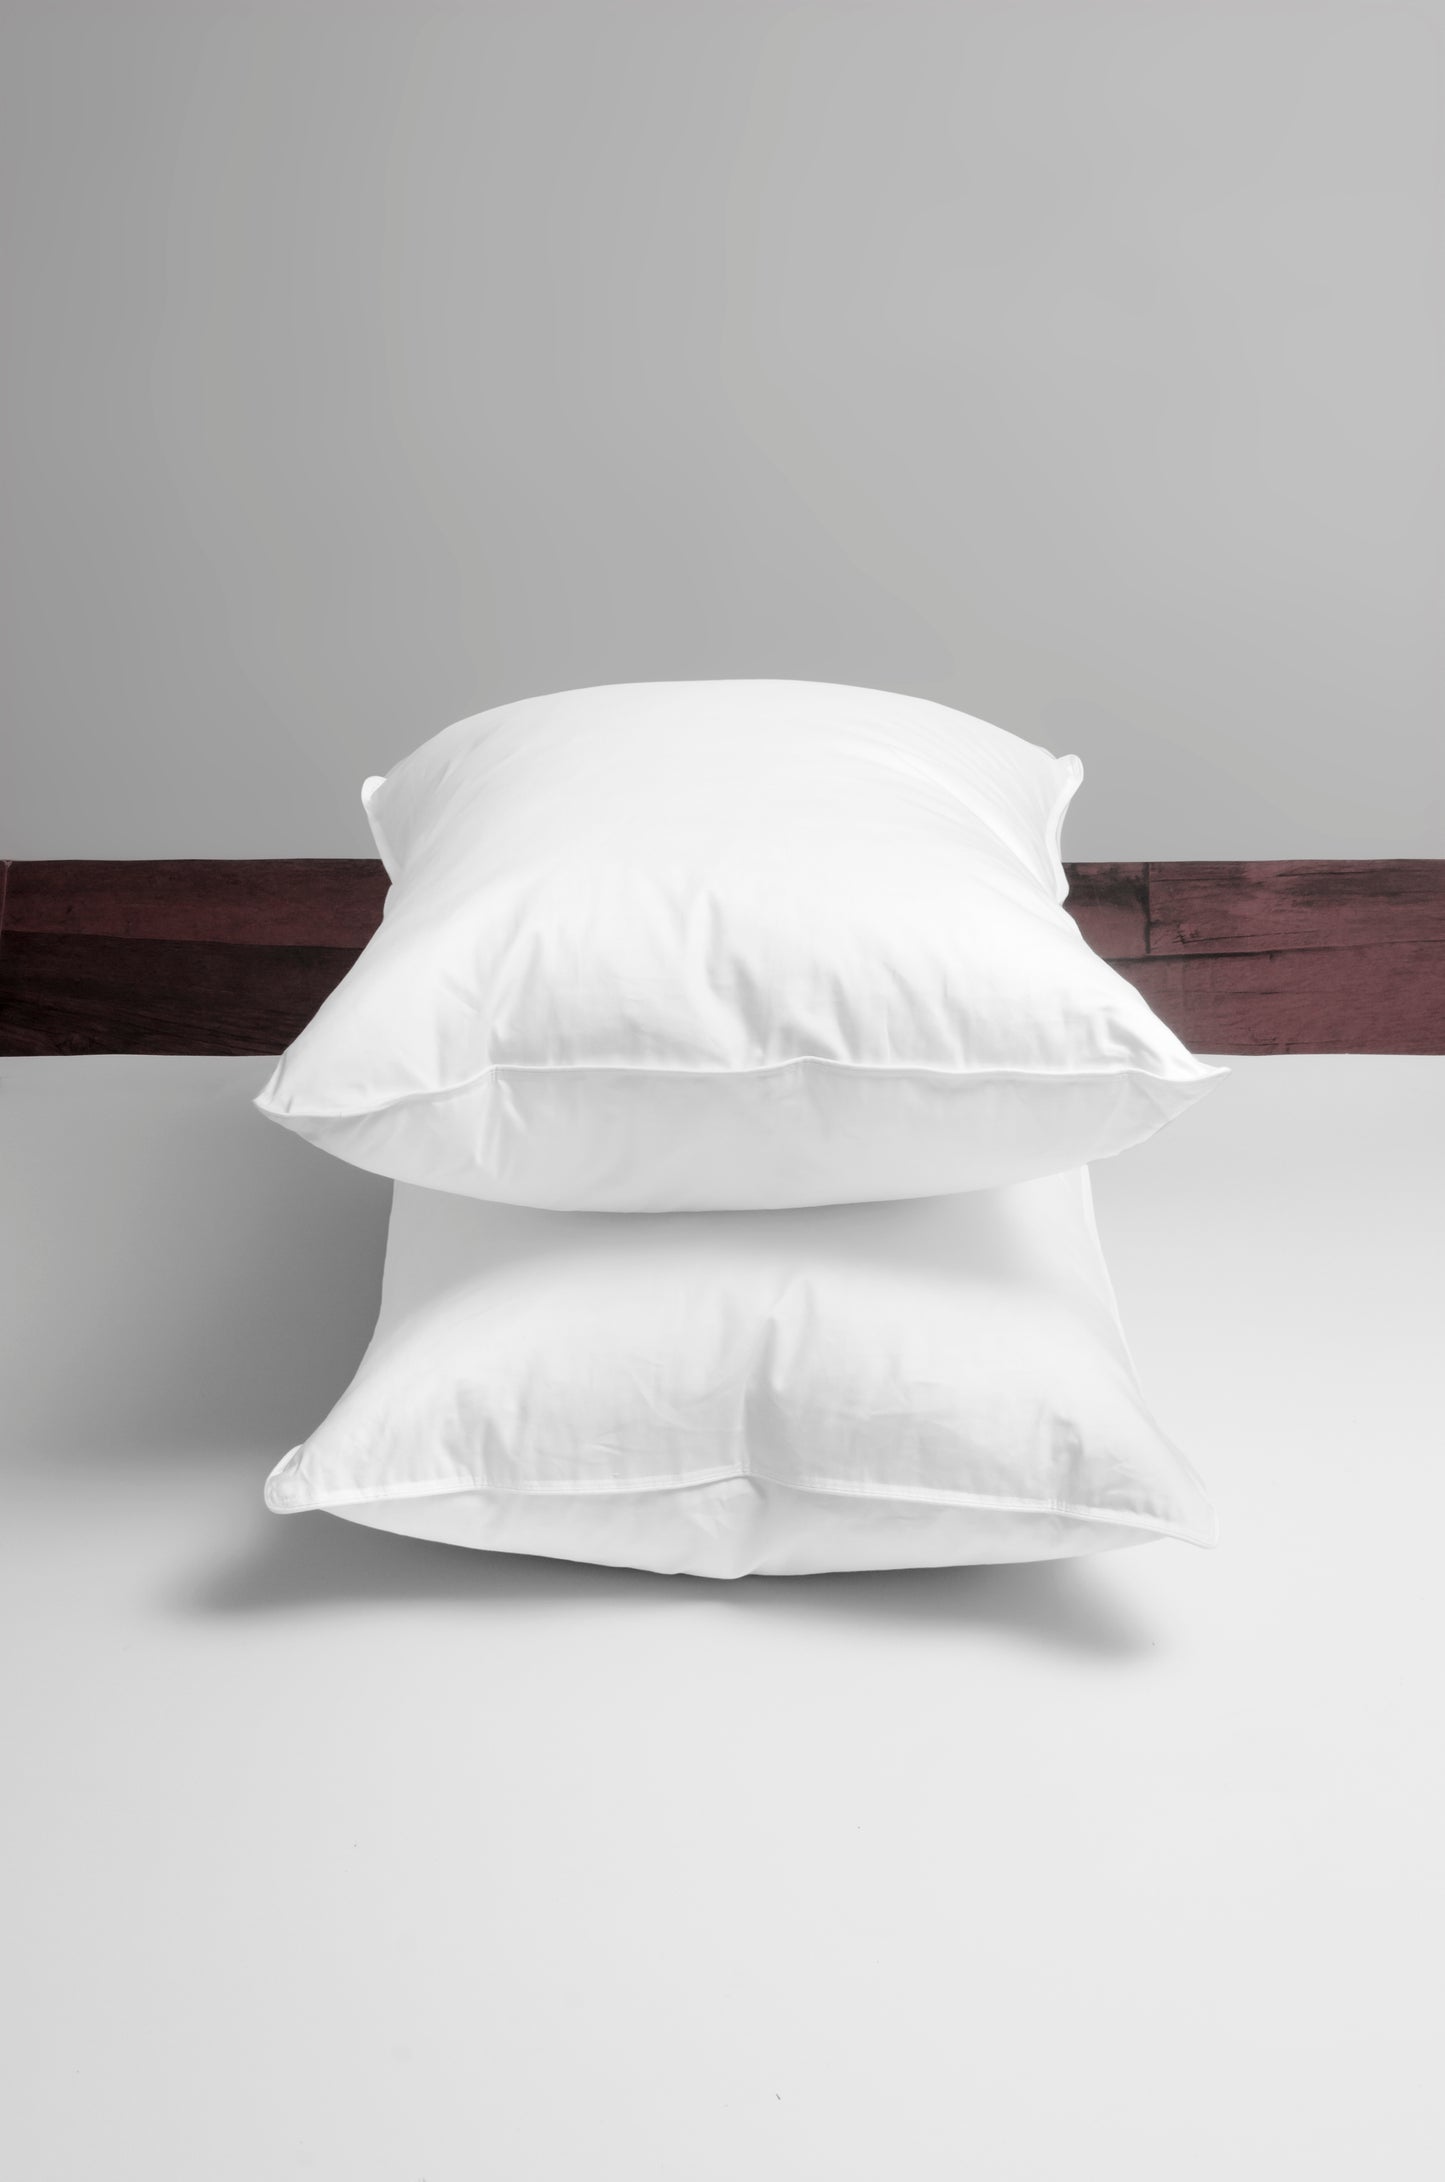 Pure Down & Feather Blended Pillow